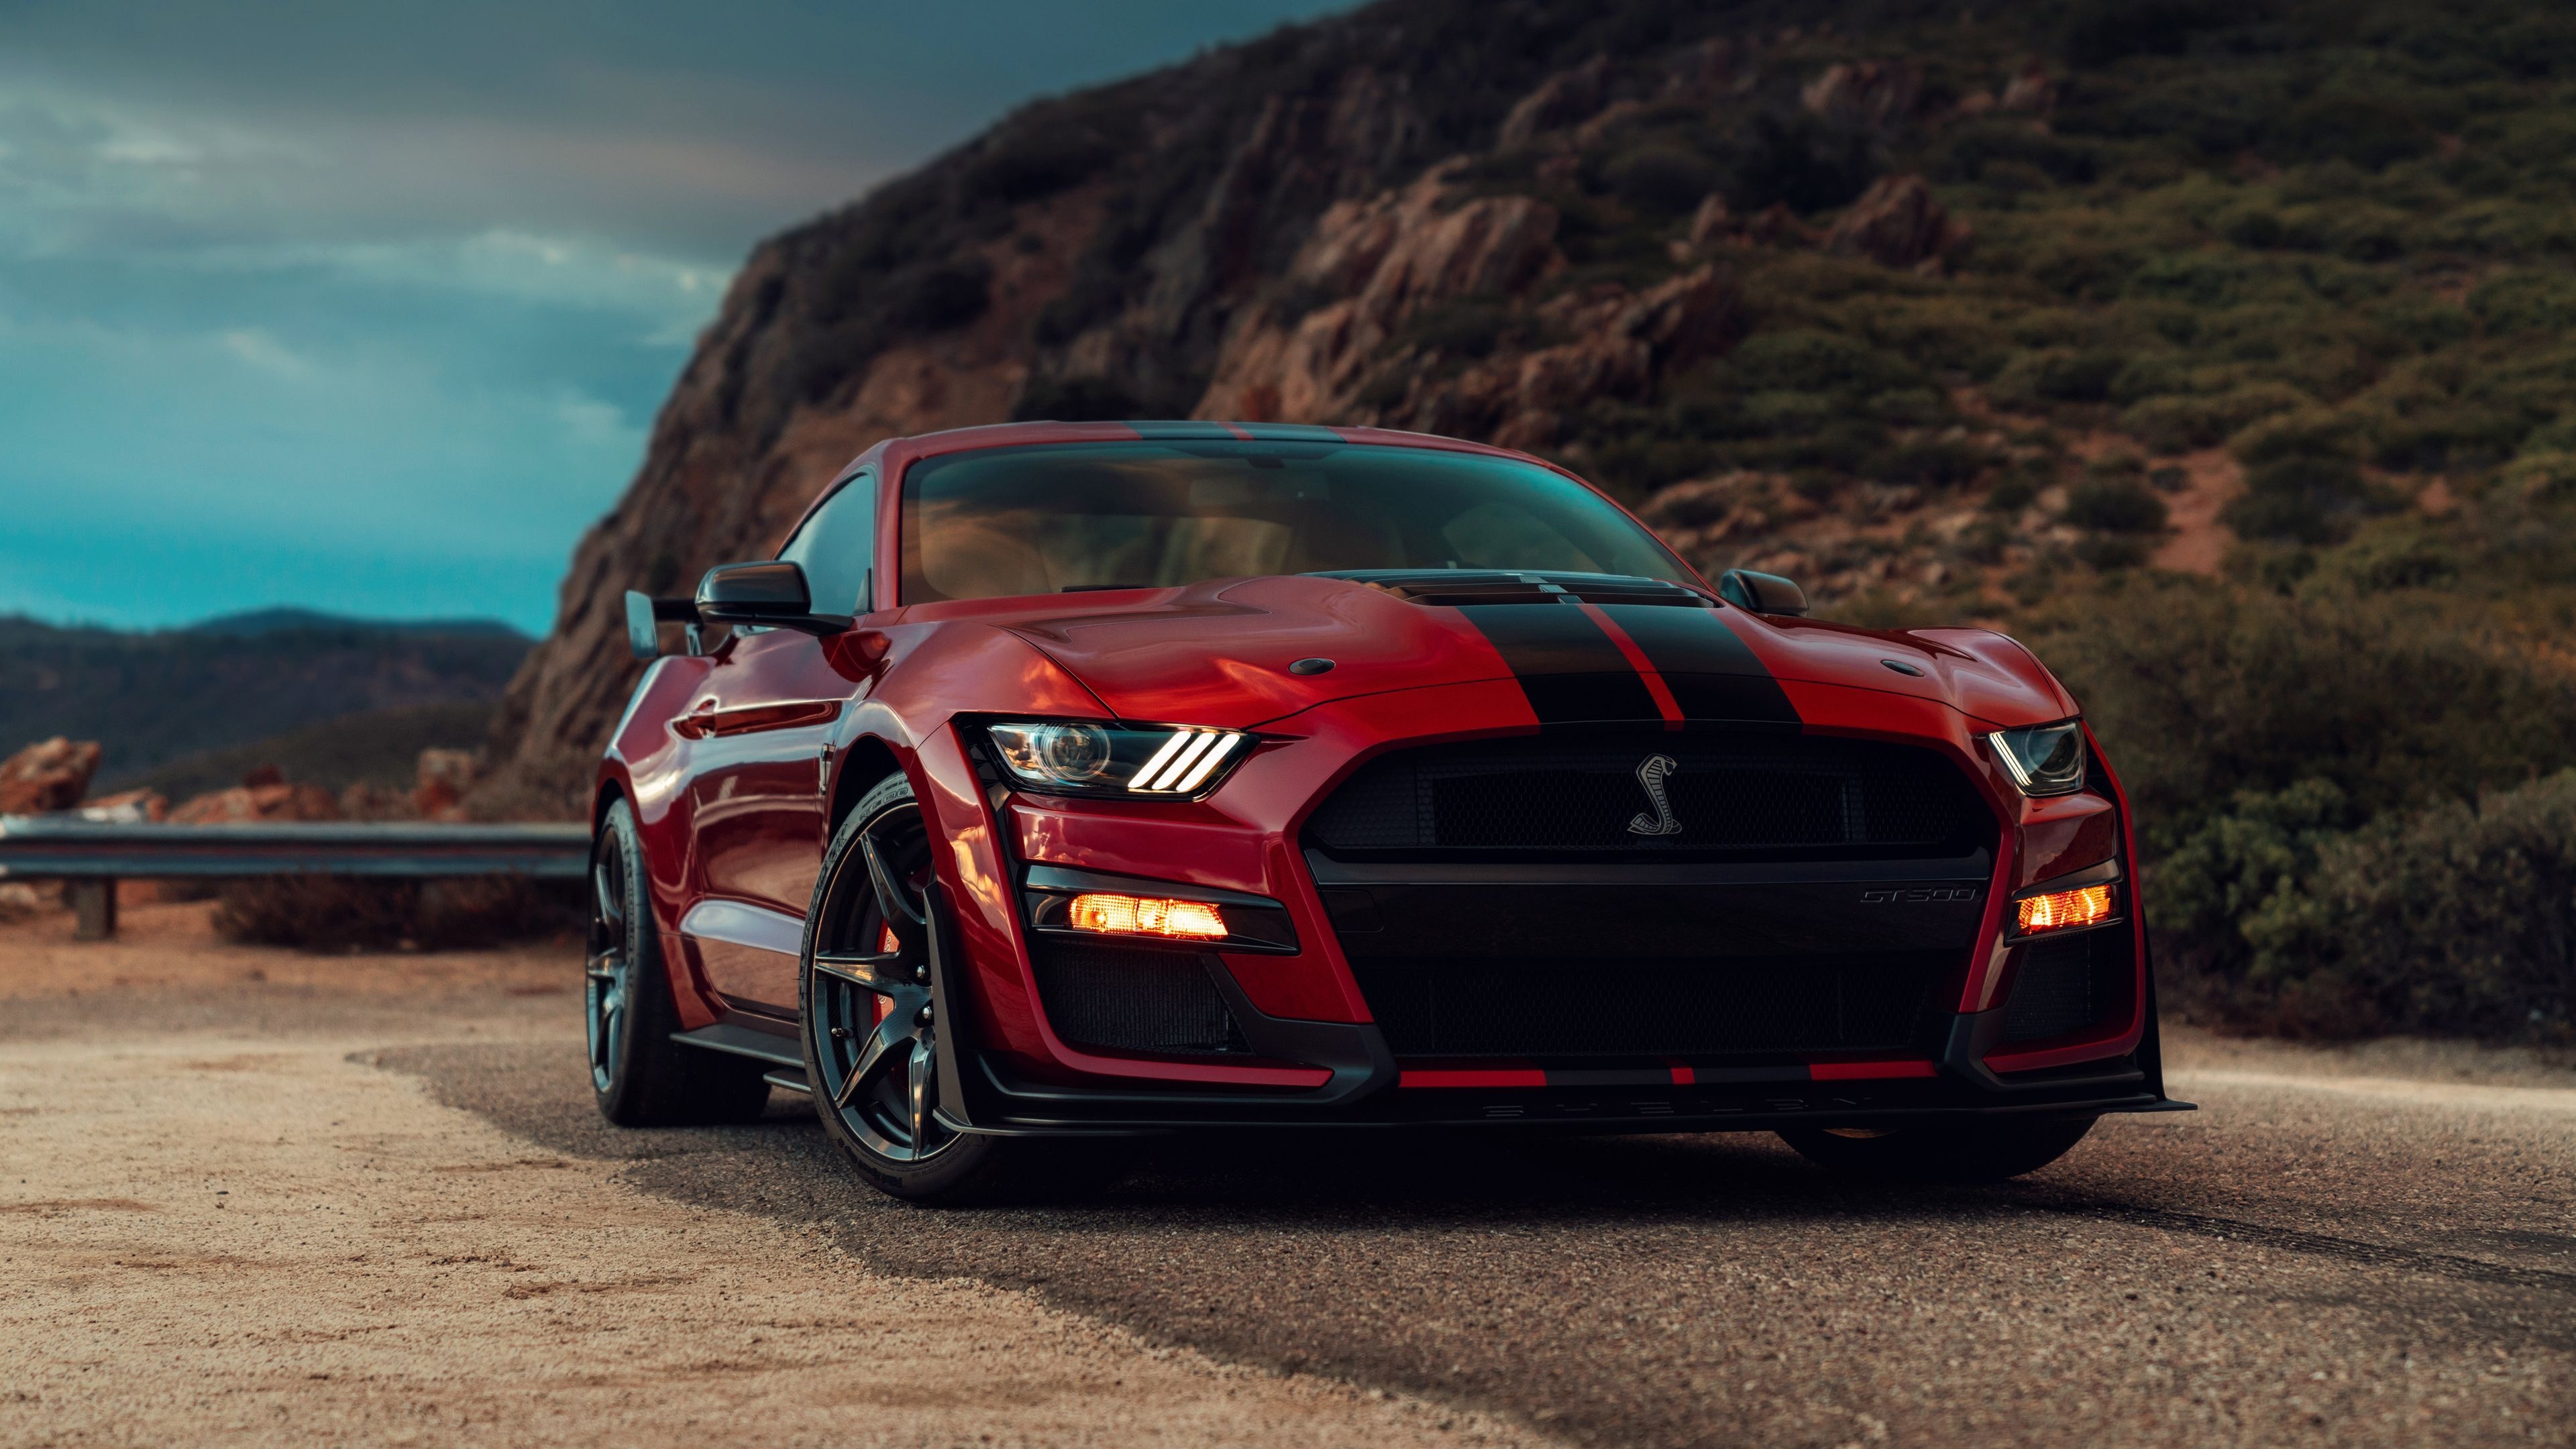 Ford Mustang Shelby, Ultimate muscle car, High-performance pedigree, Shelby racing stripes, Track-ready Mustang, 3840x2160 4K Desktop